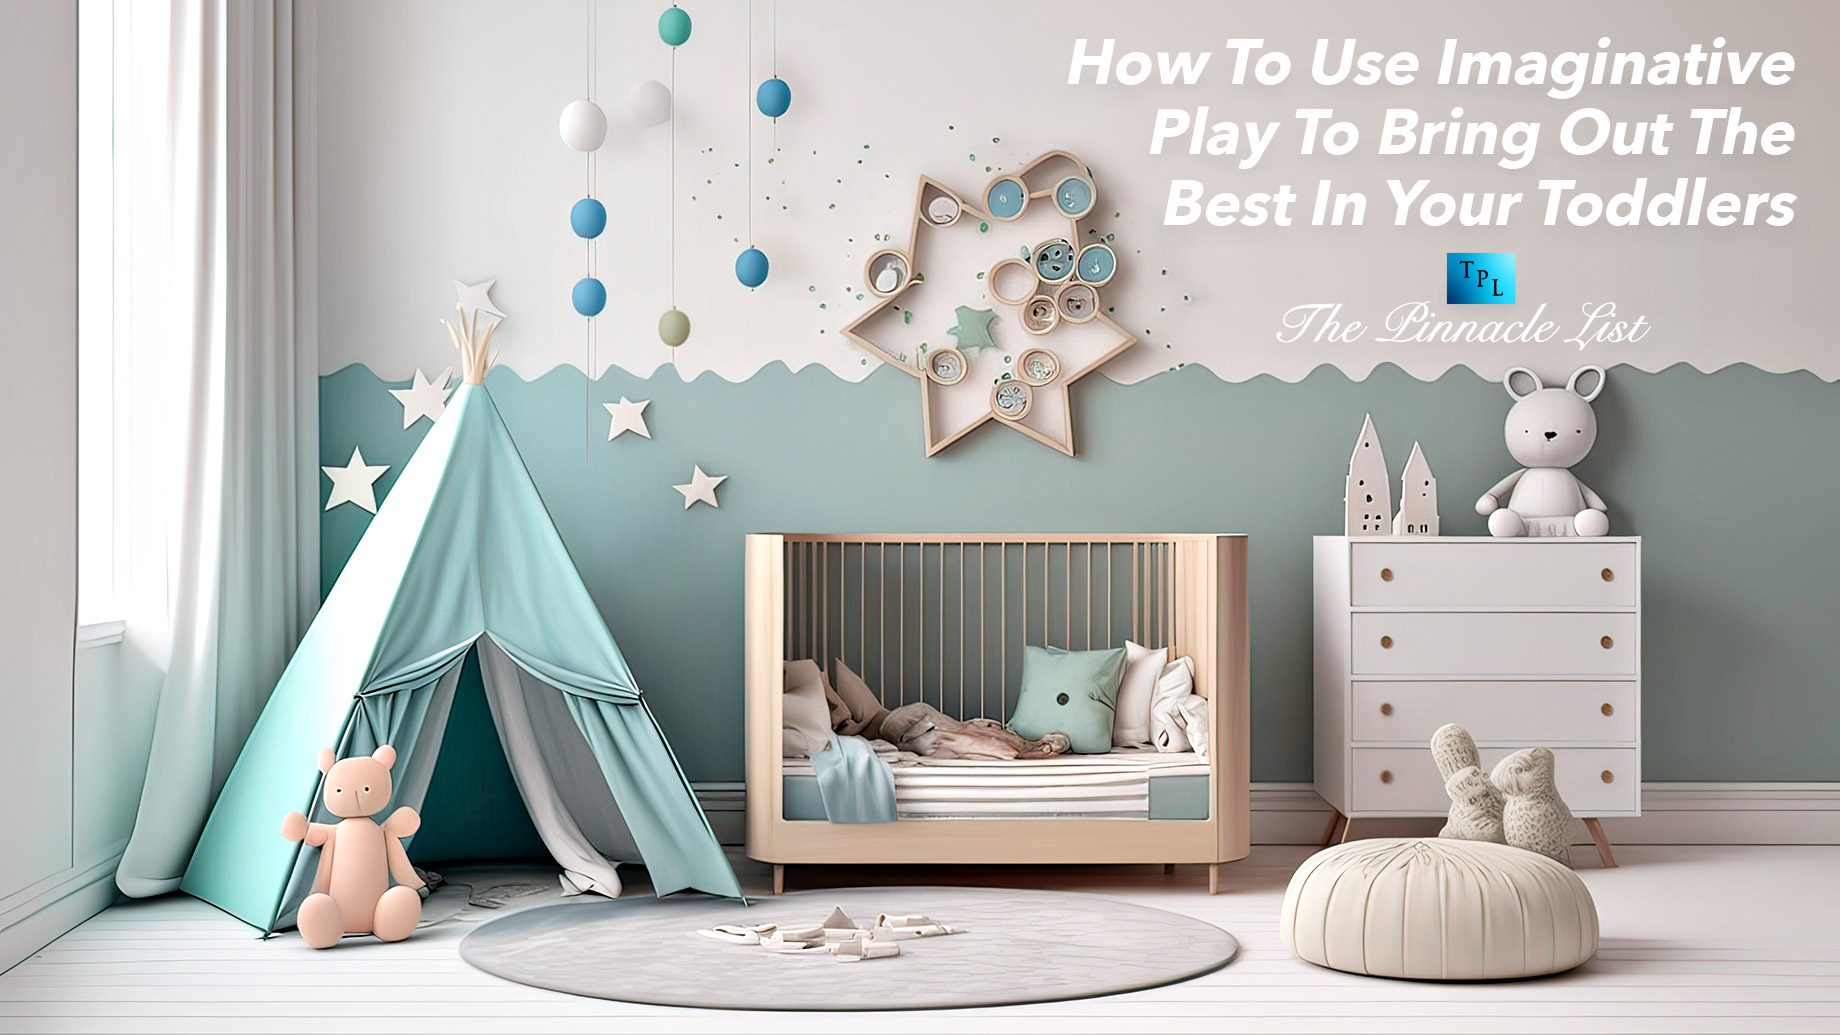 How To Use Imaginative Play To Bring Out The Best In Your Toddlers